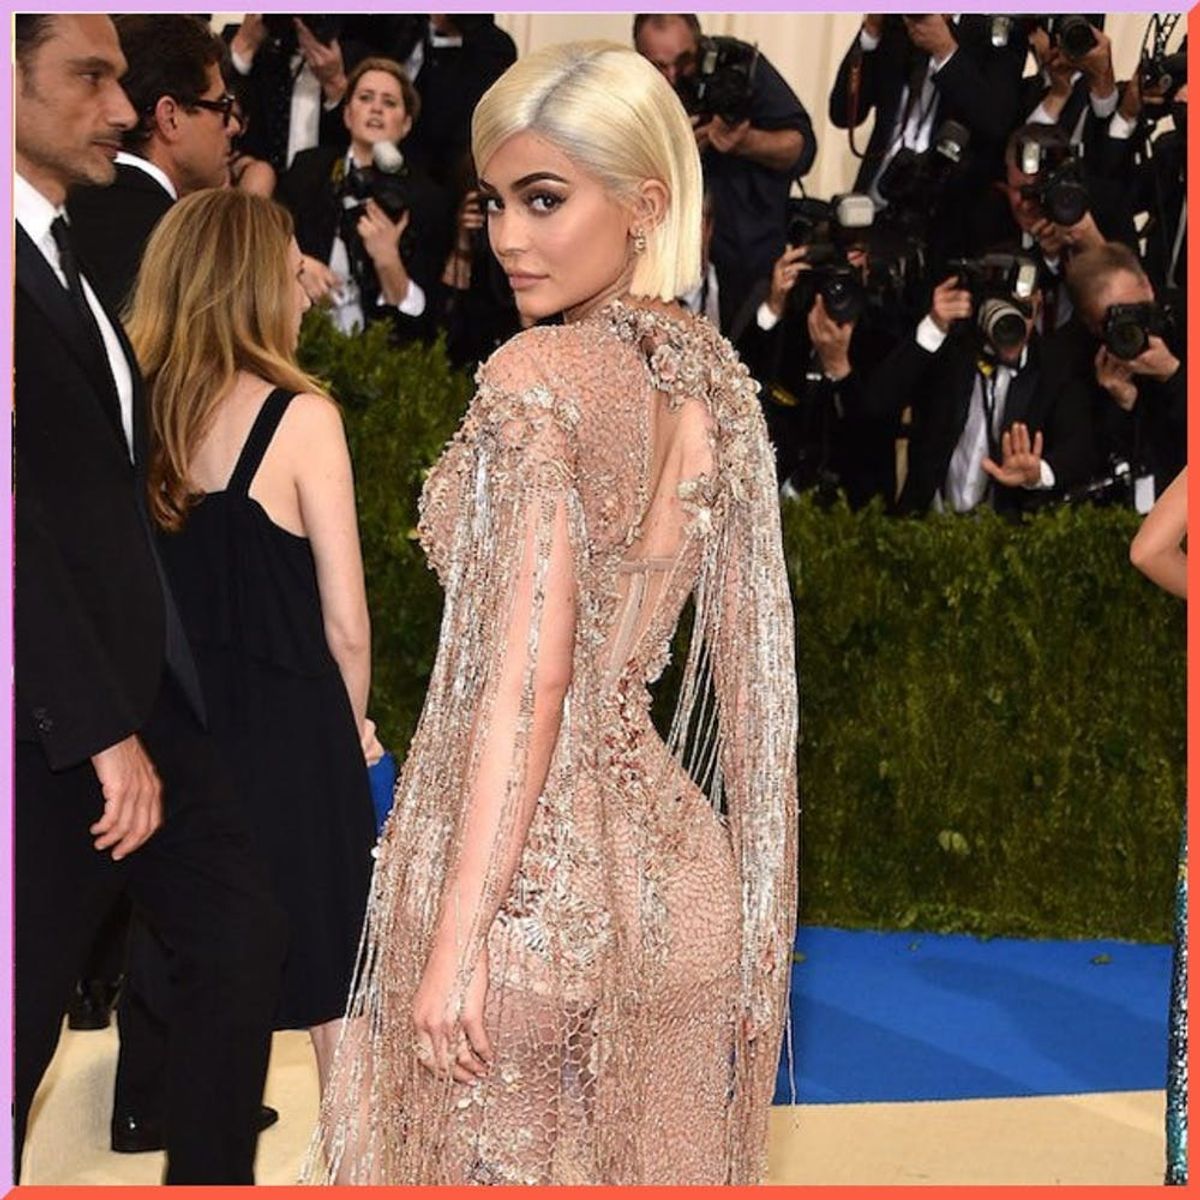 Met Gala 2017: Kendall Jenner, Kylie Try to Out-Naked Each Other